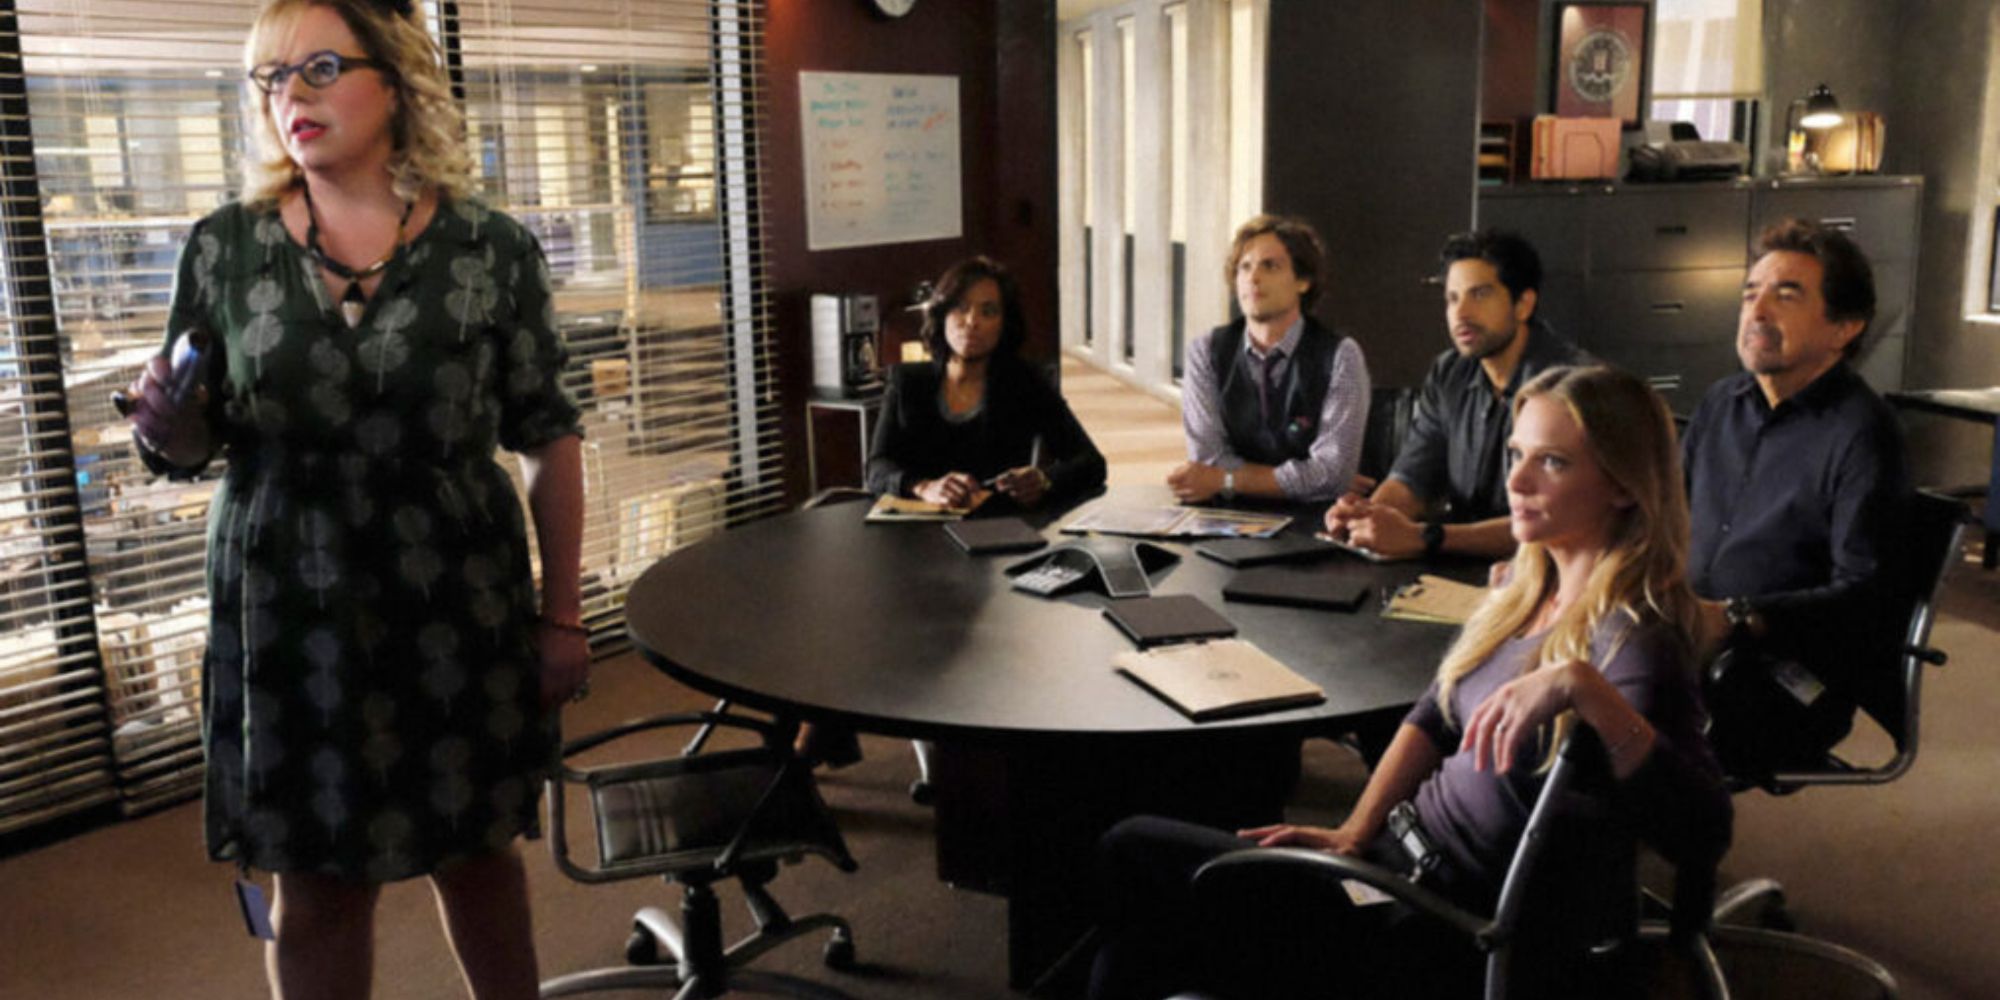 Criminal Minds Rossi Actor Credits Fans For Paramount+ Revival